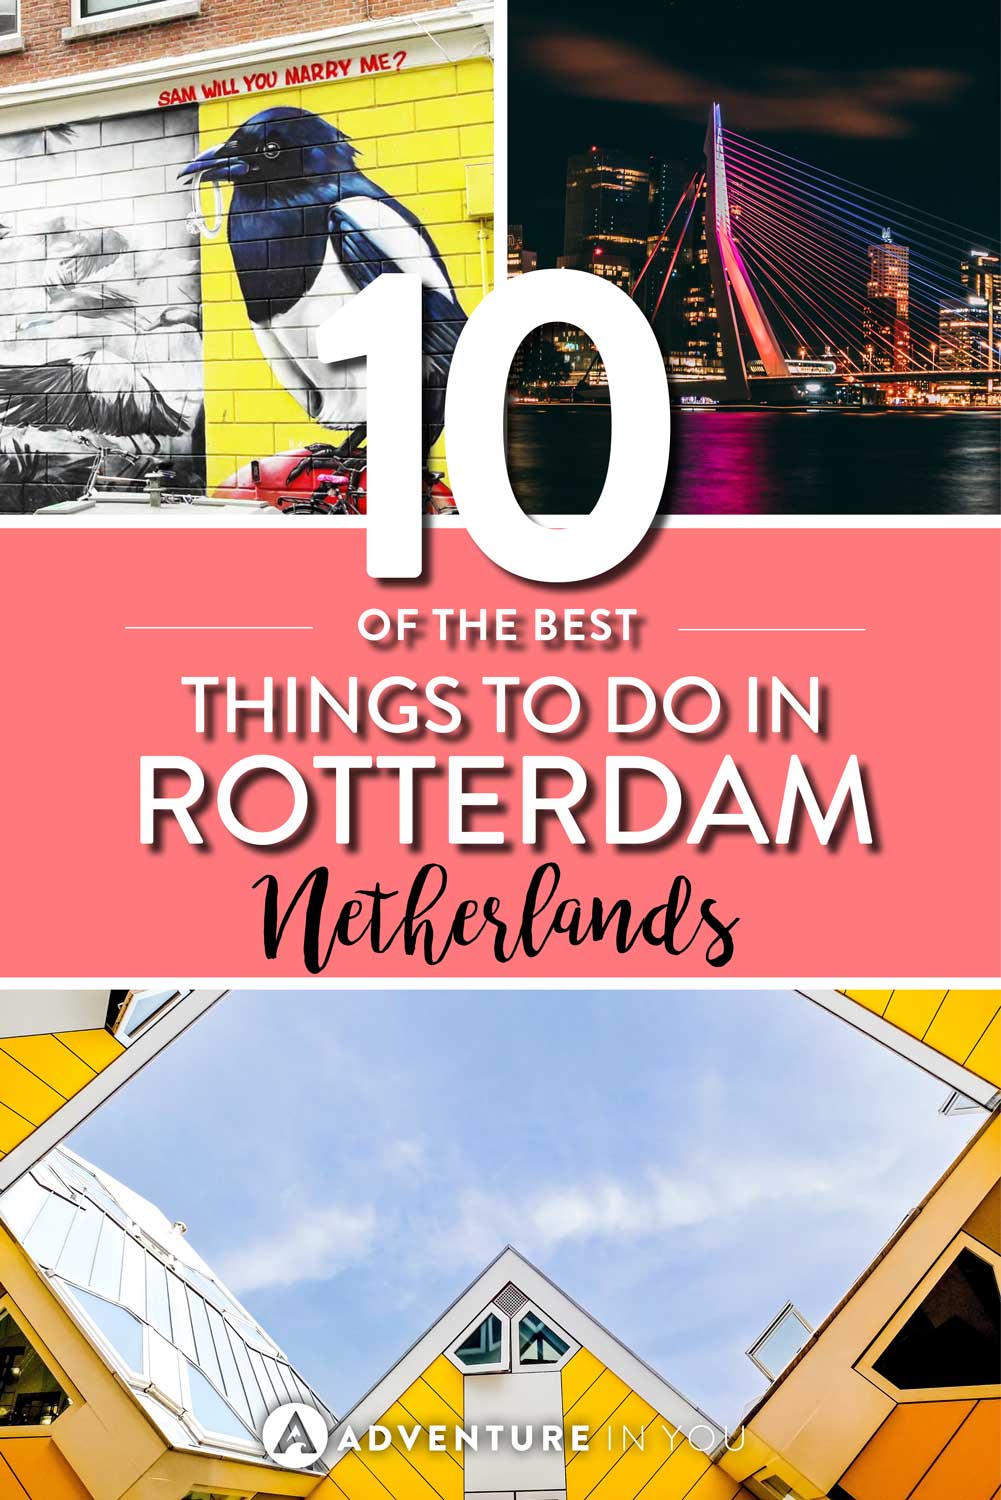 Rotterdam Netherlands | Looking for inspiration on the best things to do in Rotterdam? Our local guide gives us tips on the best things to see, where to eat, and the best attractions to see.